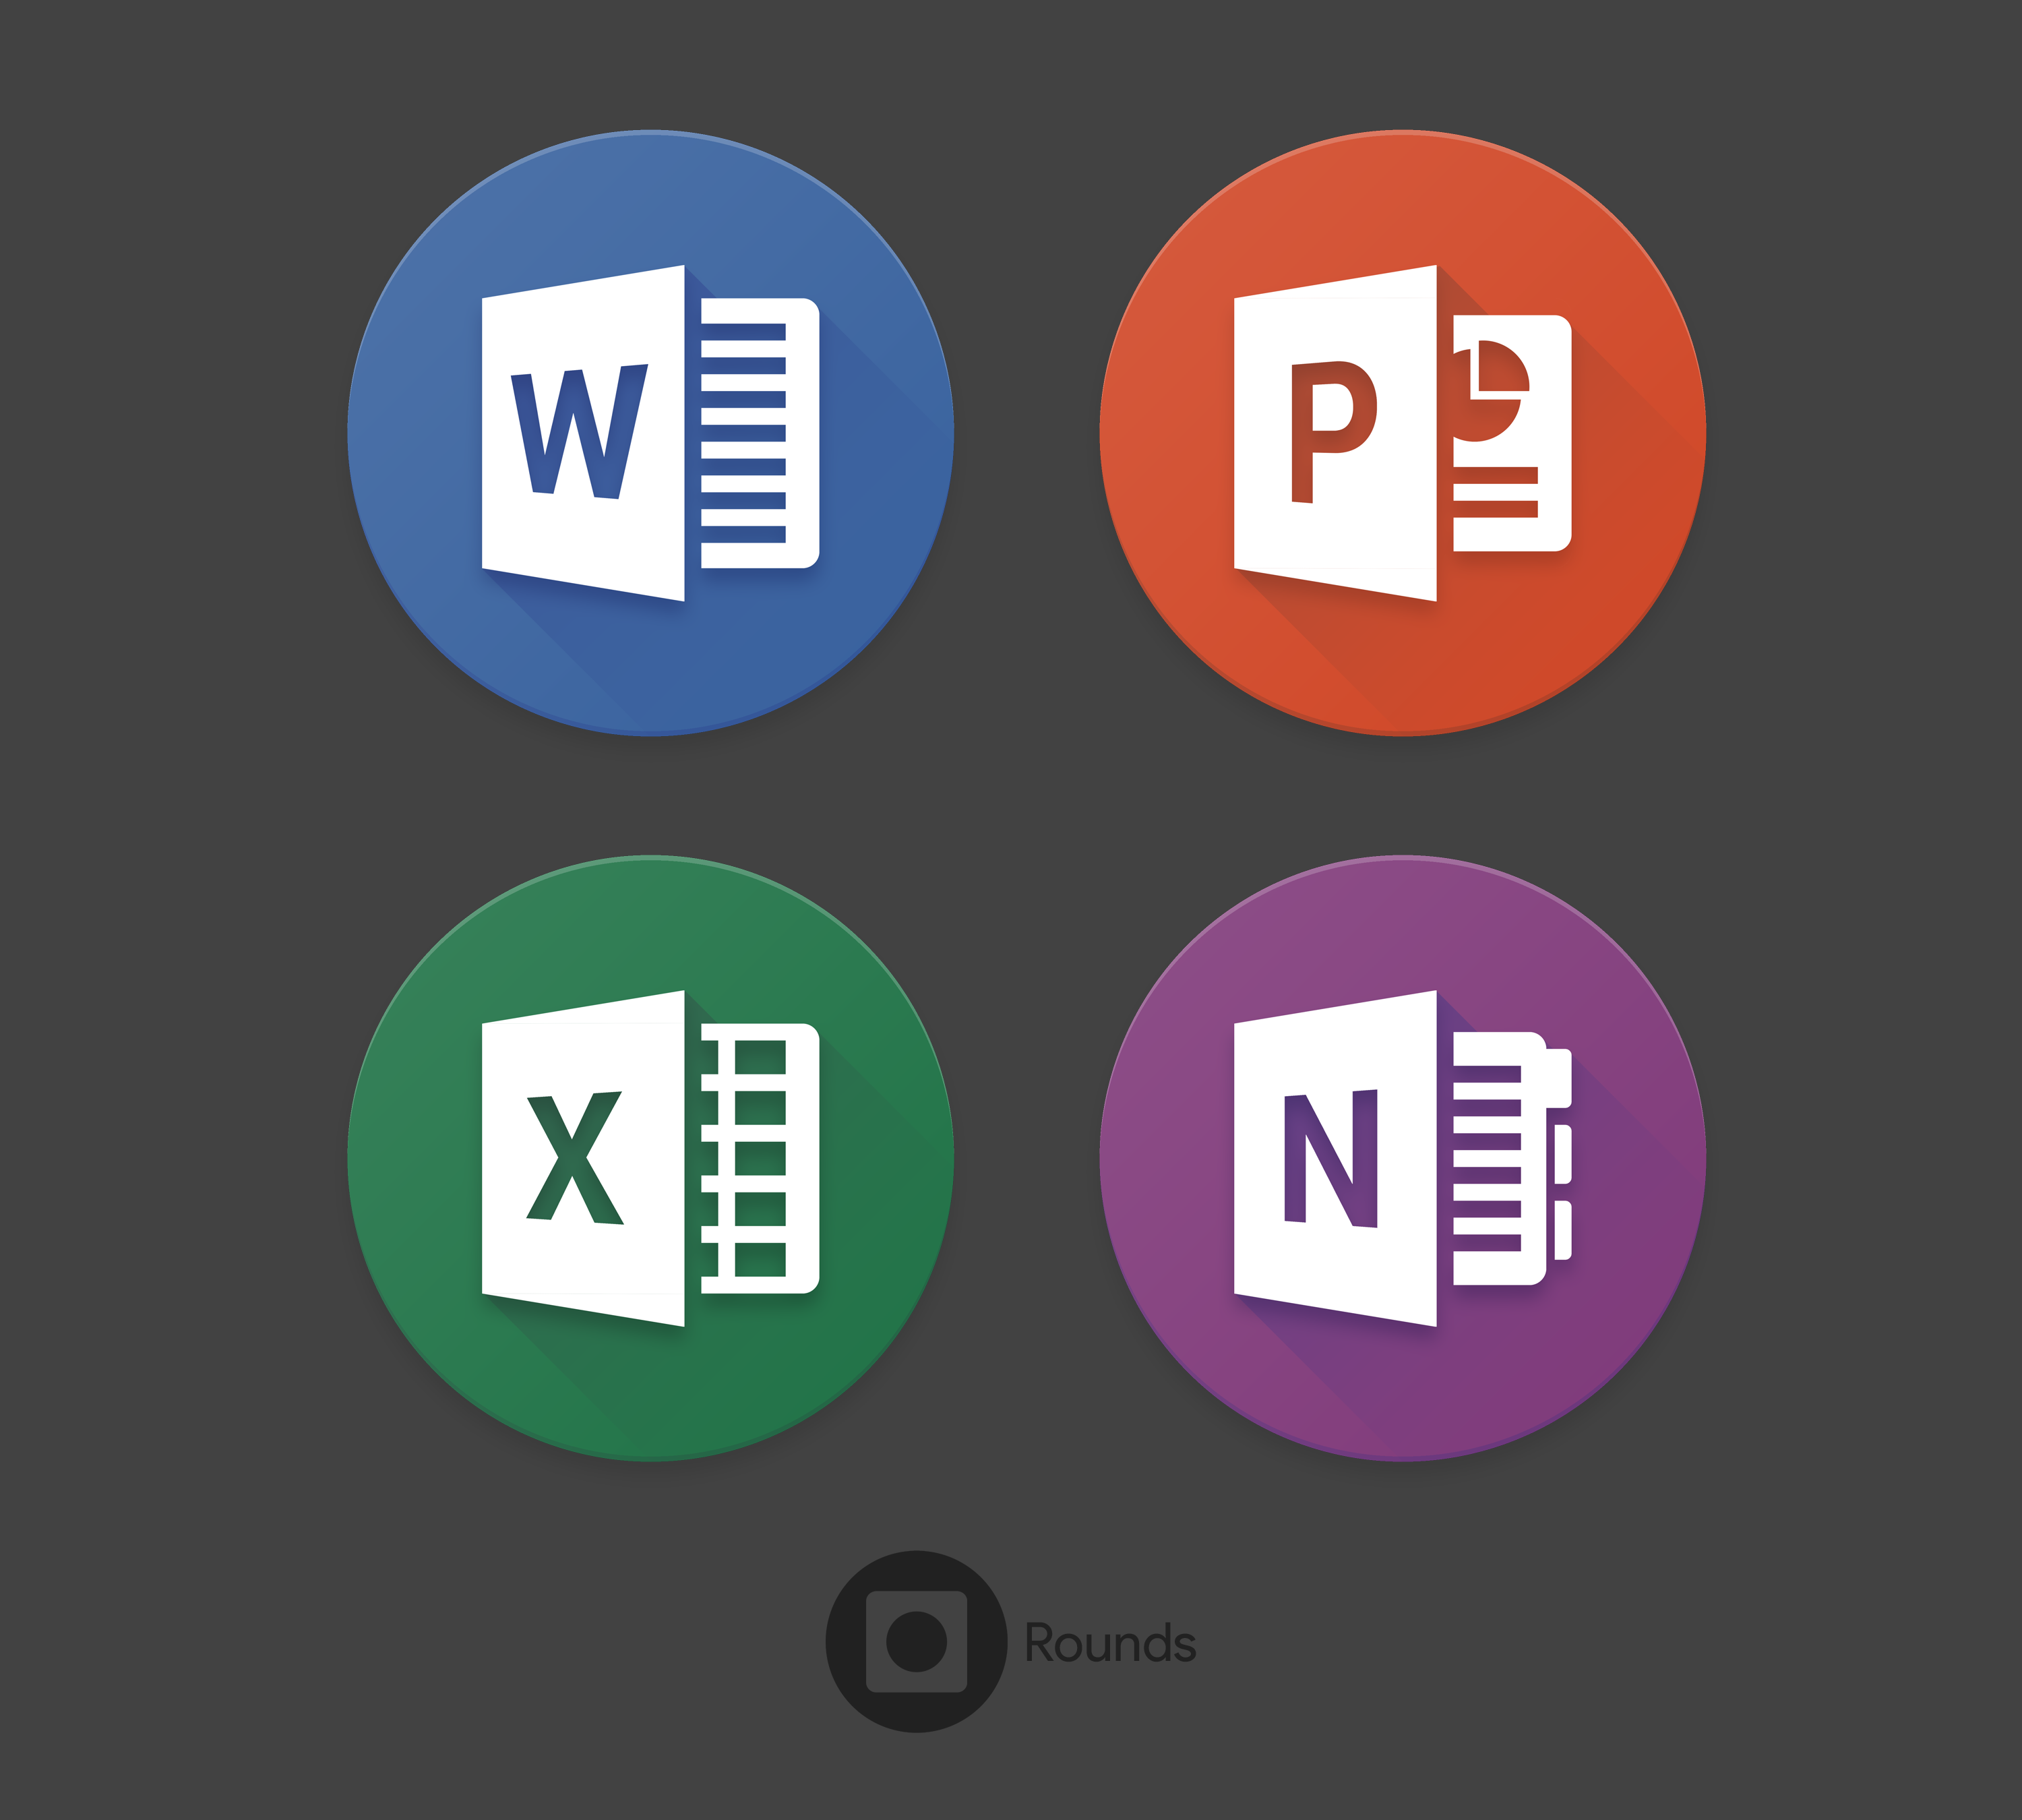 microsoft word excel free download